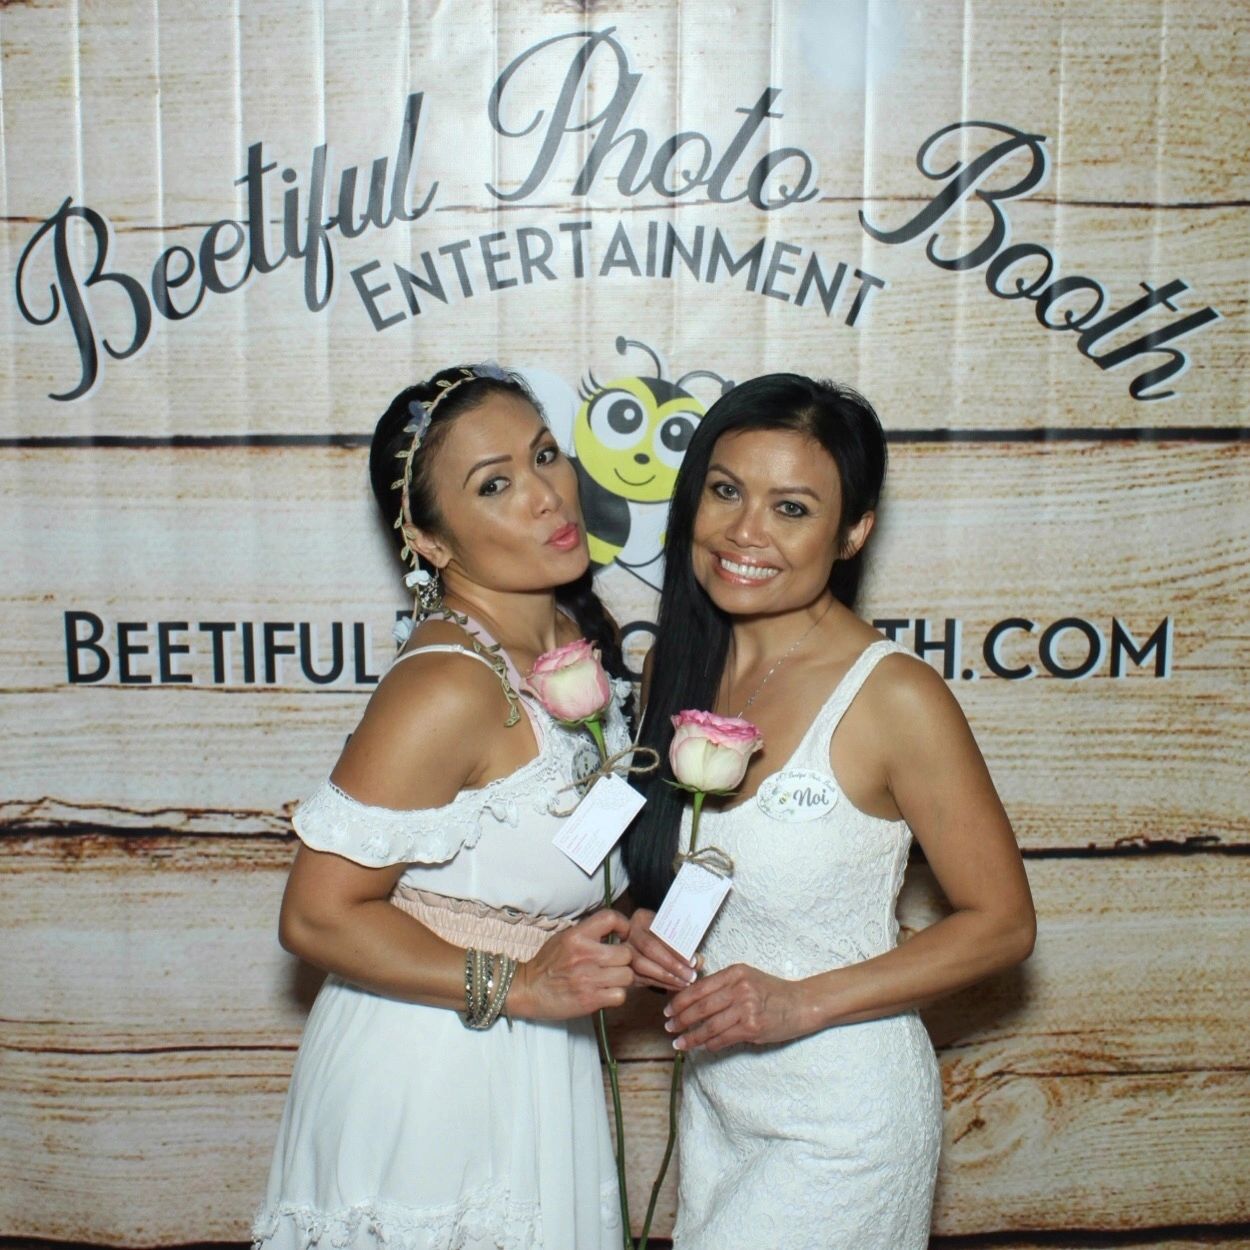 Beetiful Photo Booth Entertainment